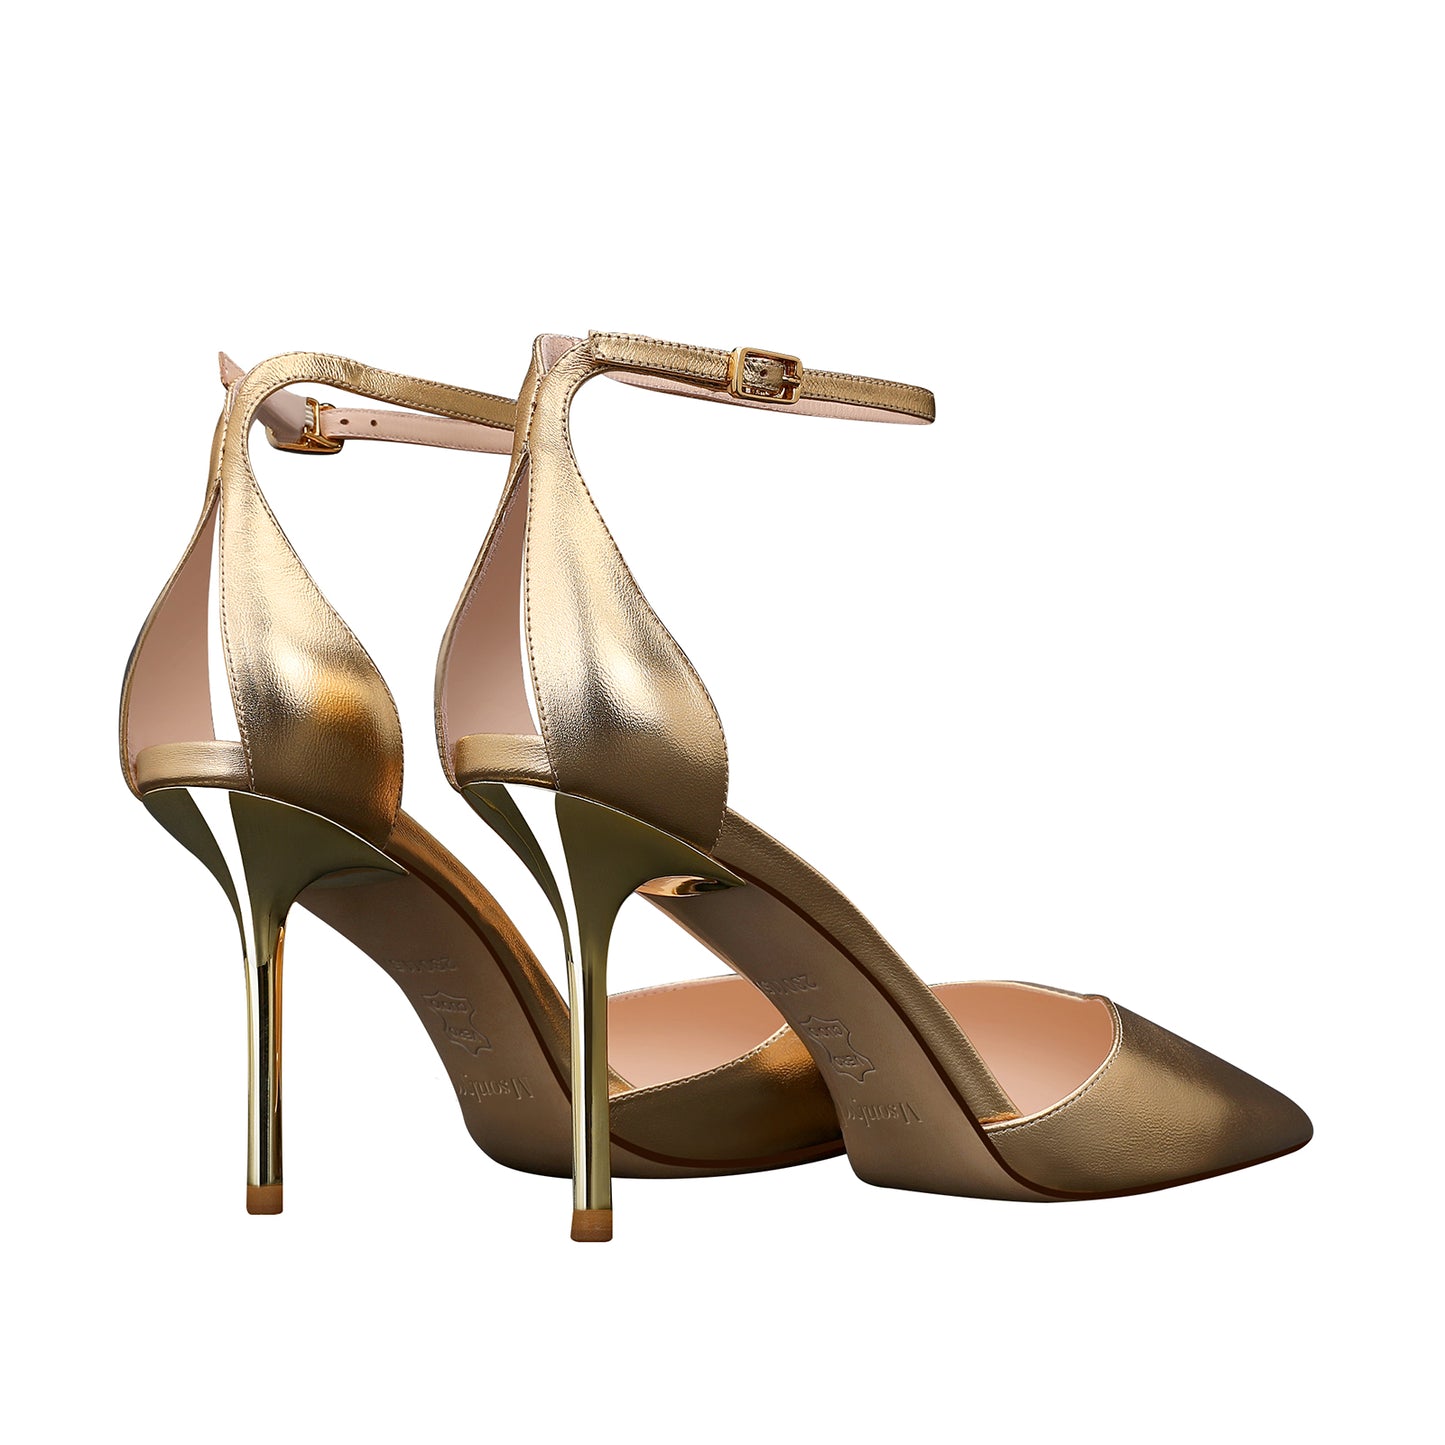 Gold Leather Peep Heel Pumps & Women's Bow High Pumps with Pointed Toe